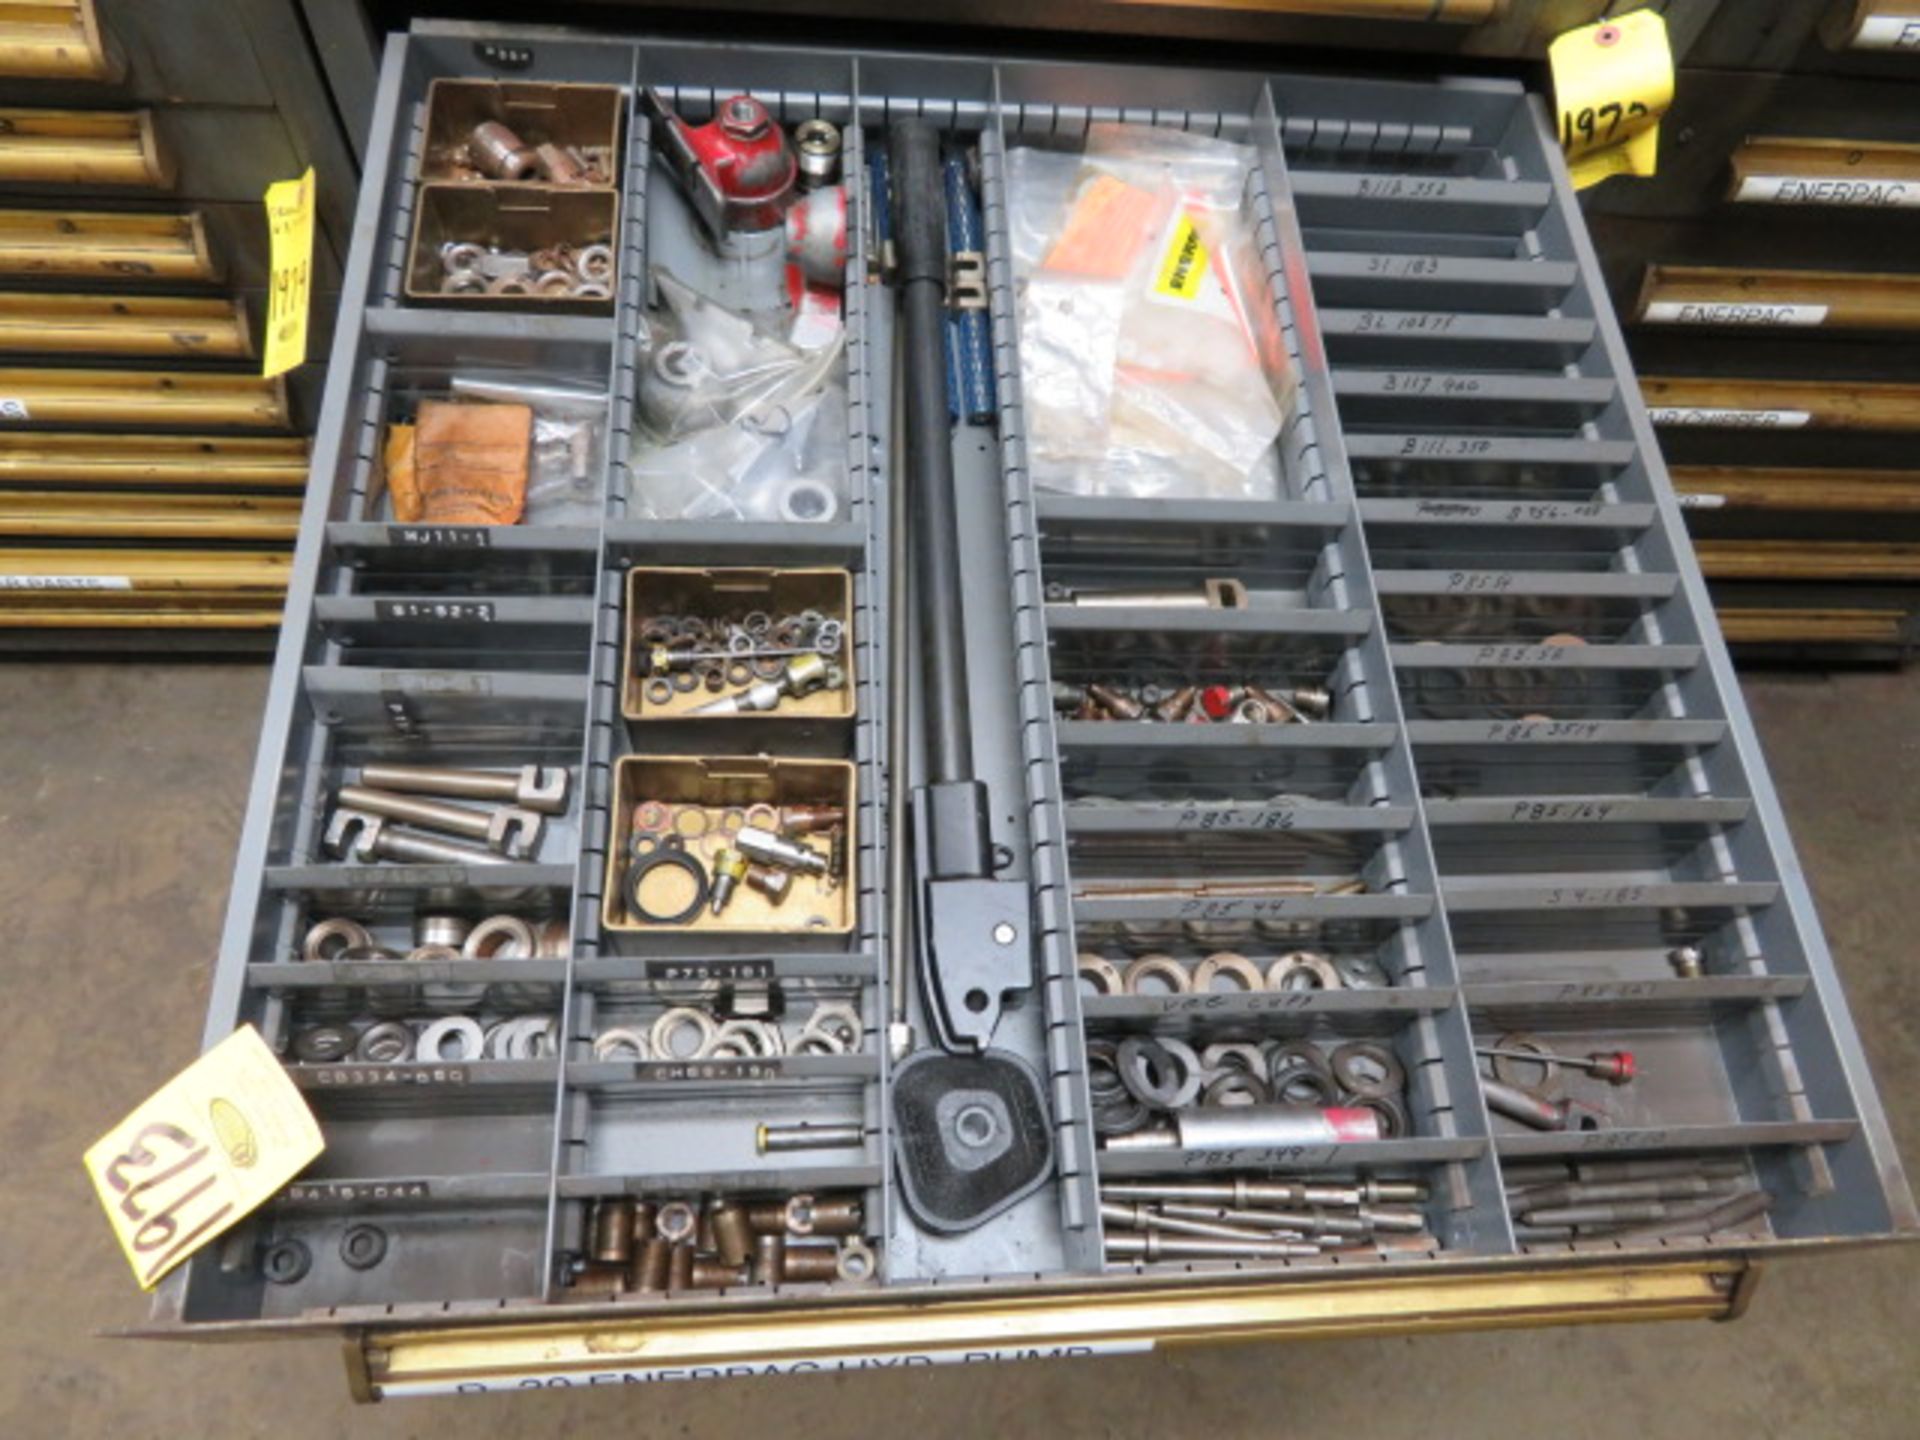 CONTENTS OF DRAWERS 4, 5, 6 - P-39 ENERPAC HYD PUMP PARTS, P-80 ENERPAC HYD PUMP PARTS